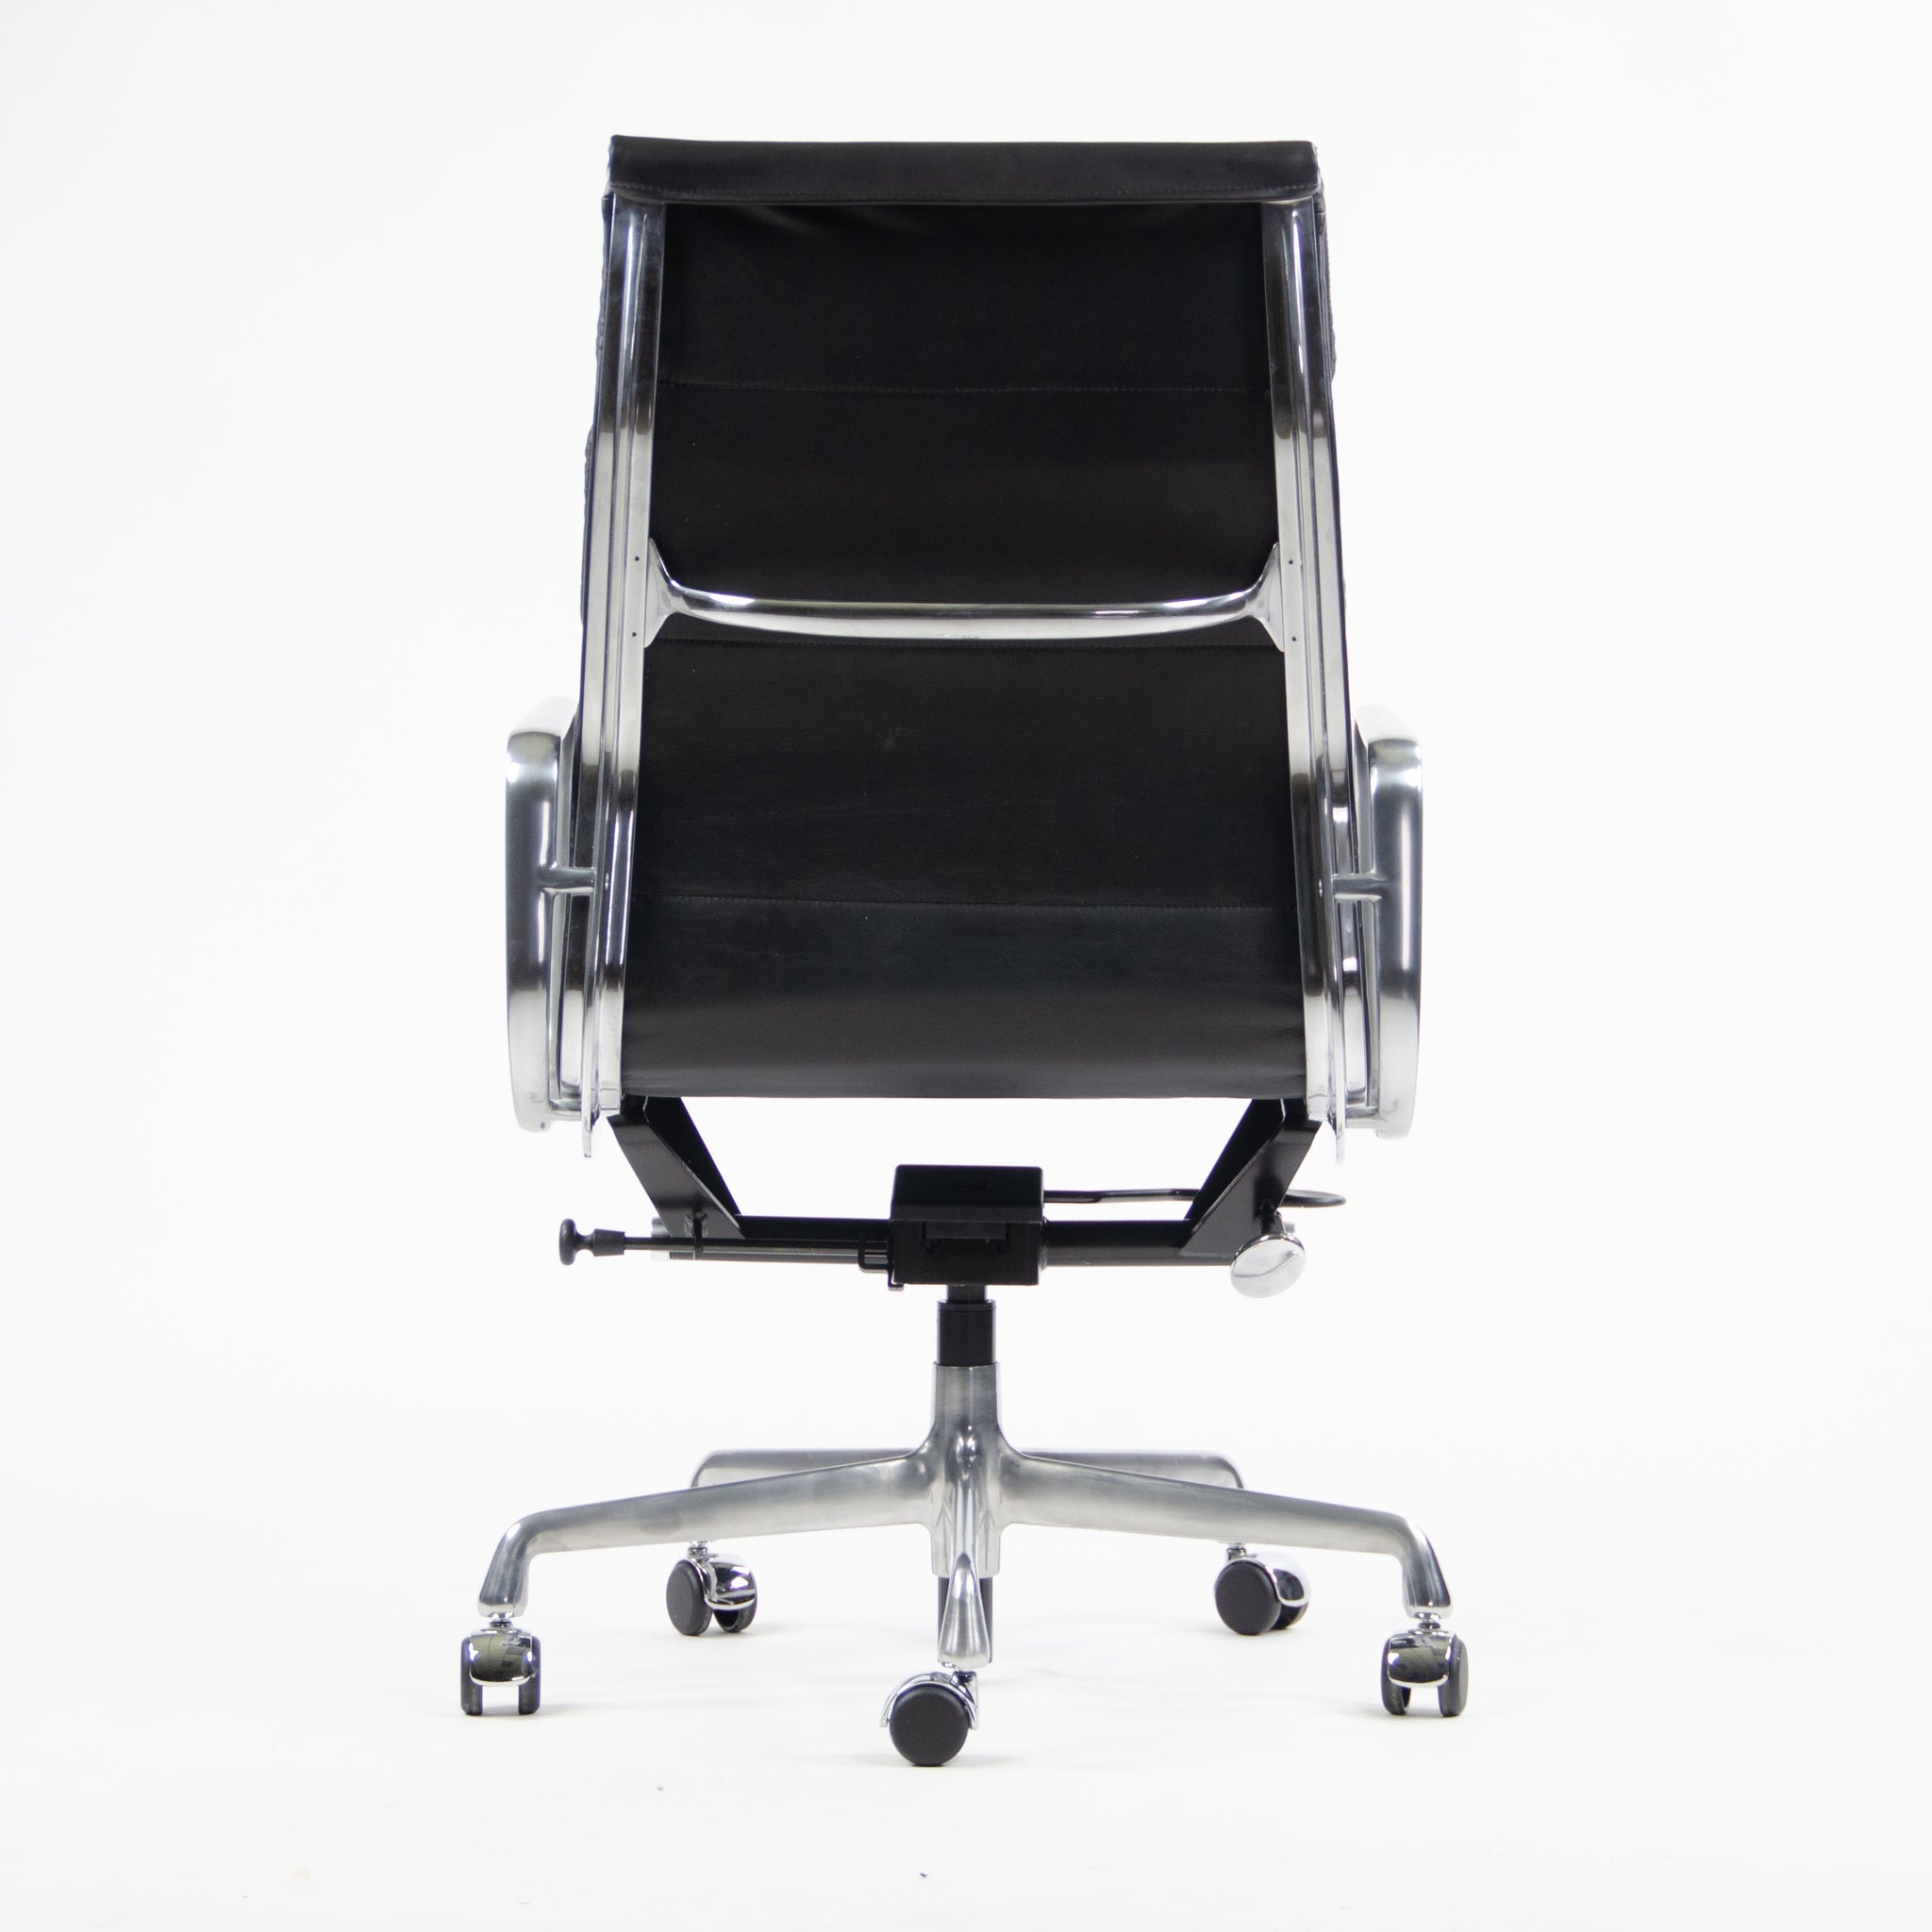 SOLD Brand New 2017 Eames Herman Miller High Soft Pad Aluminum Desk Chair Black Leather